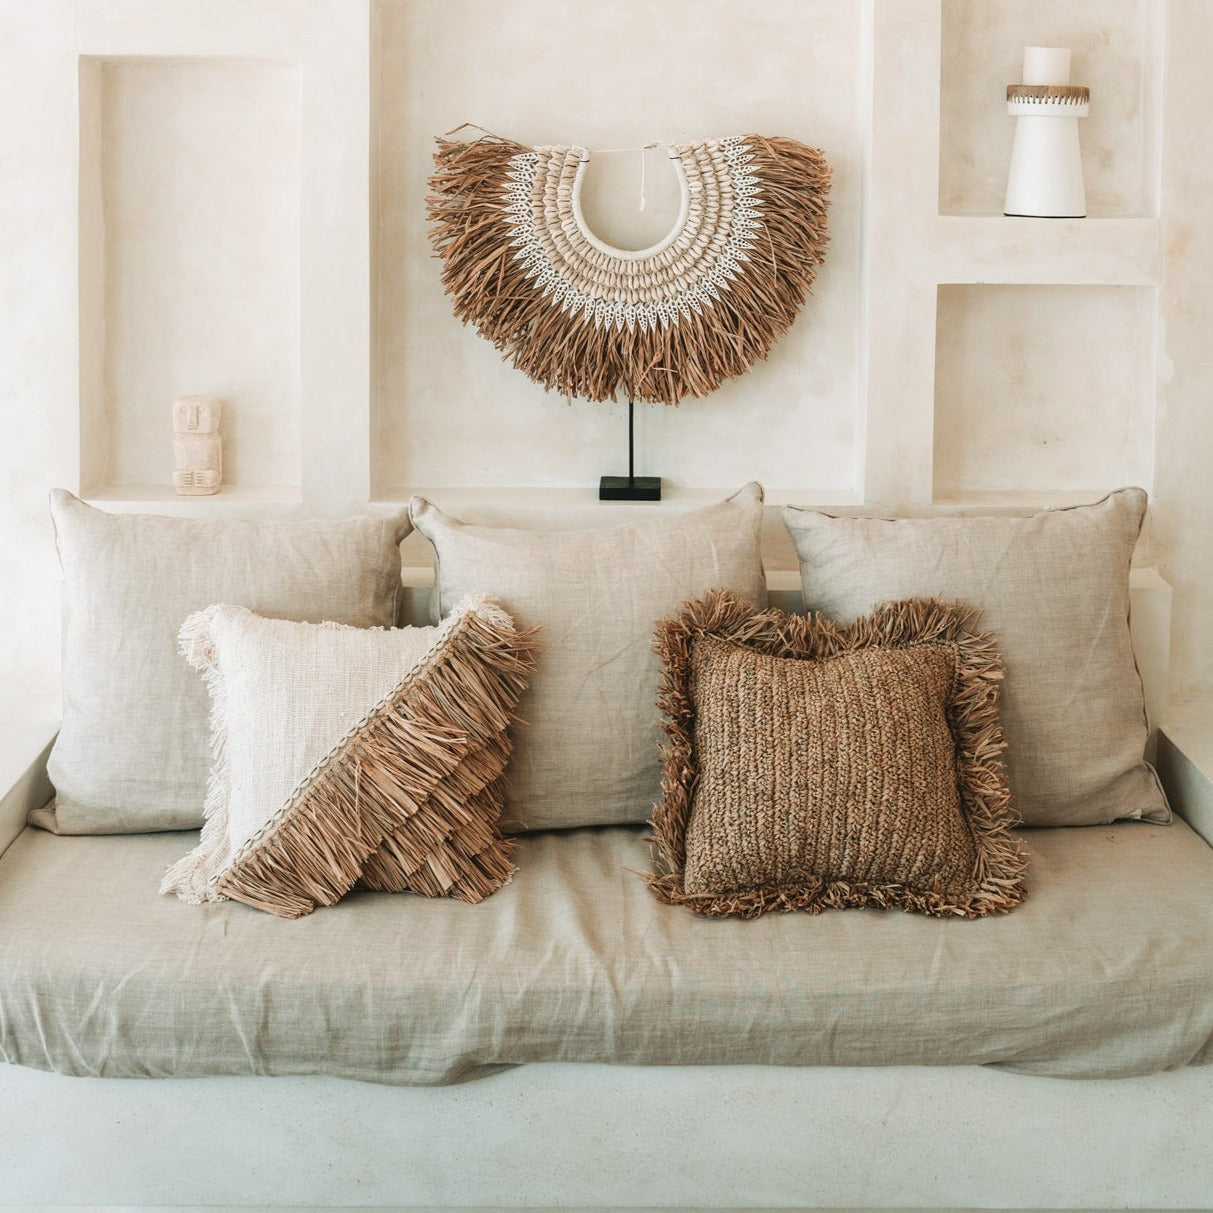 THE RAFFIA COTTON Cushion Cover interior view on couch